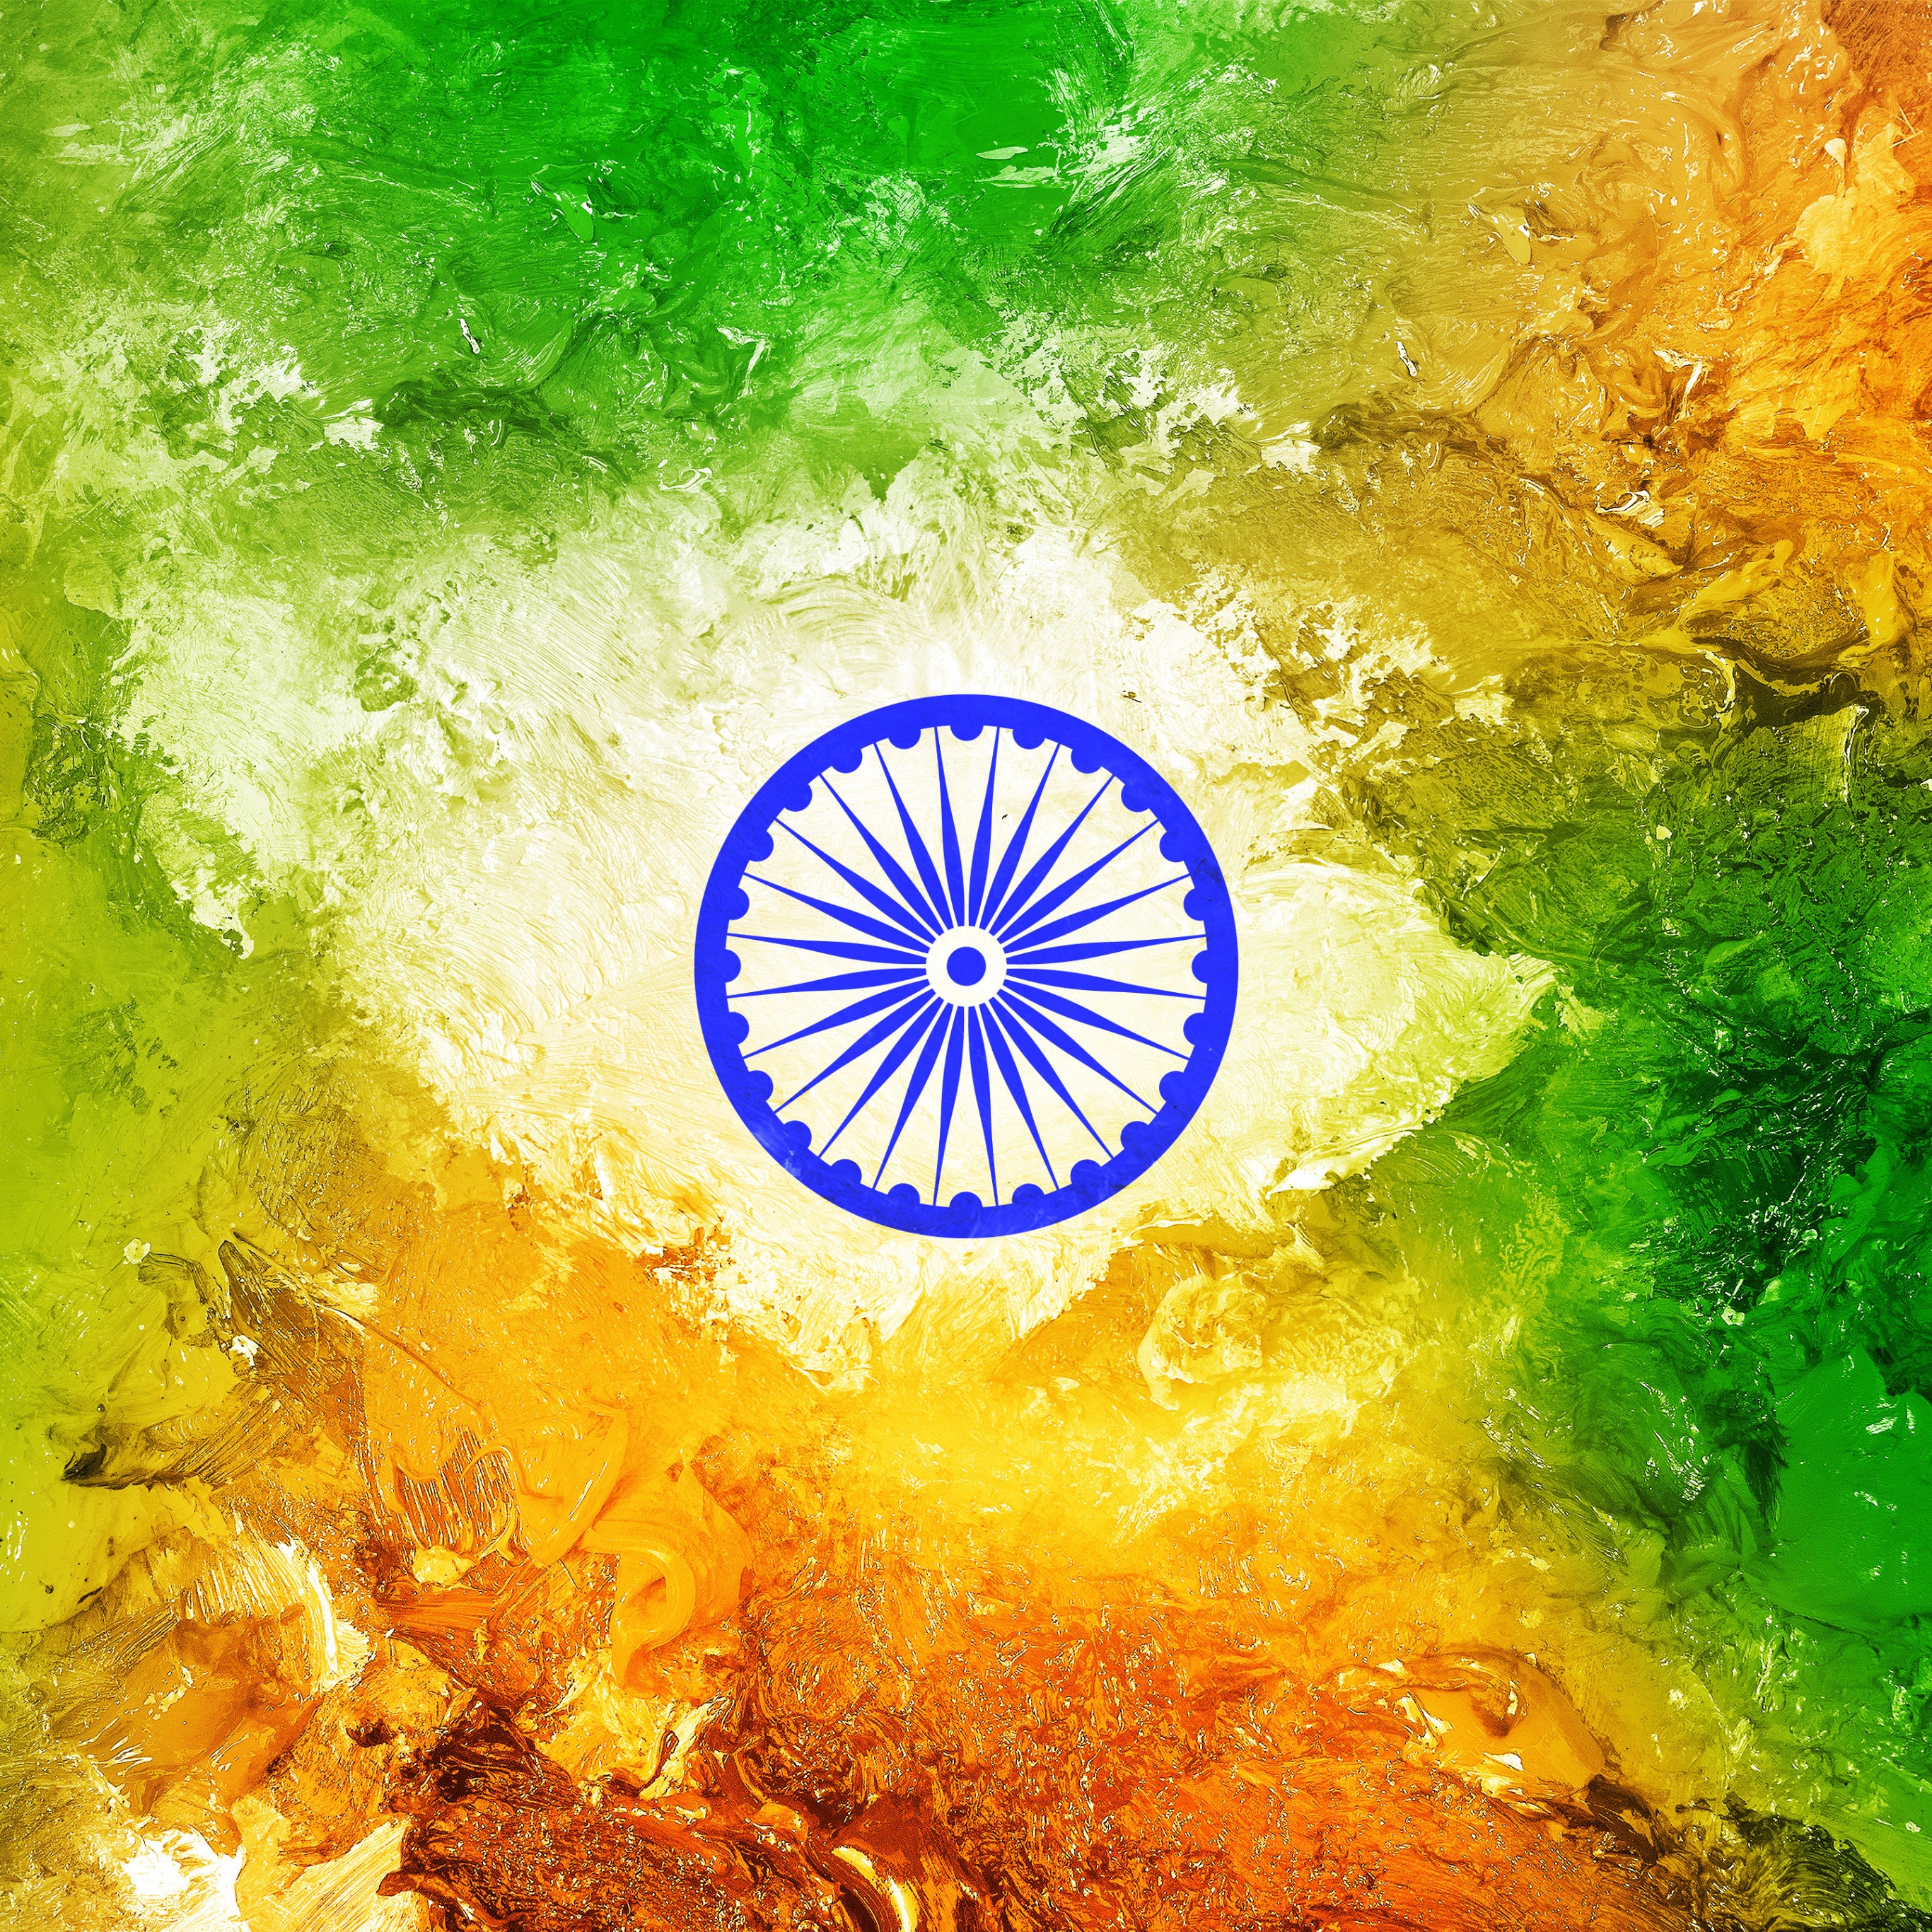 300+ Free Indian Flag Images & Pictures in HD - Pixabay